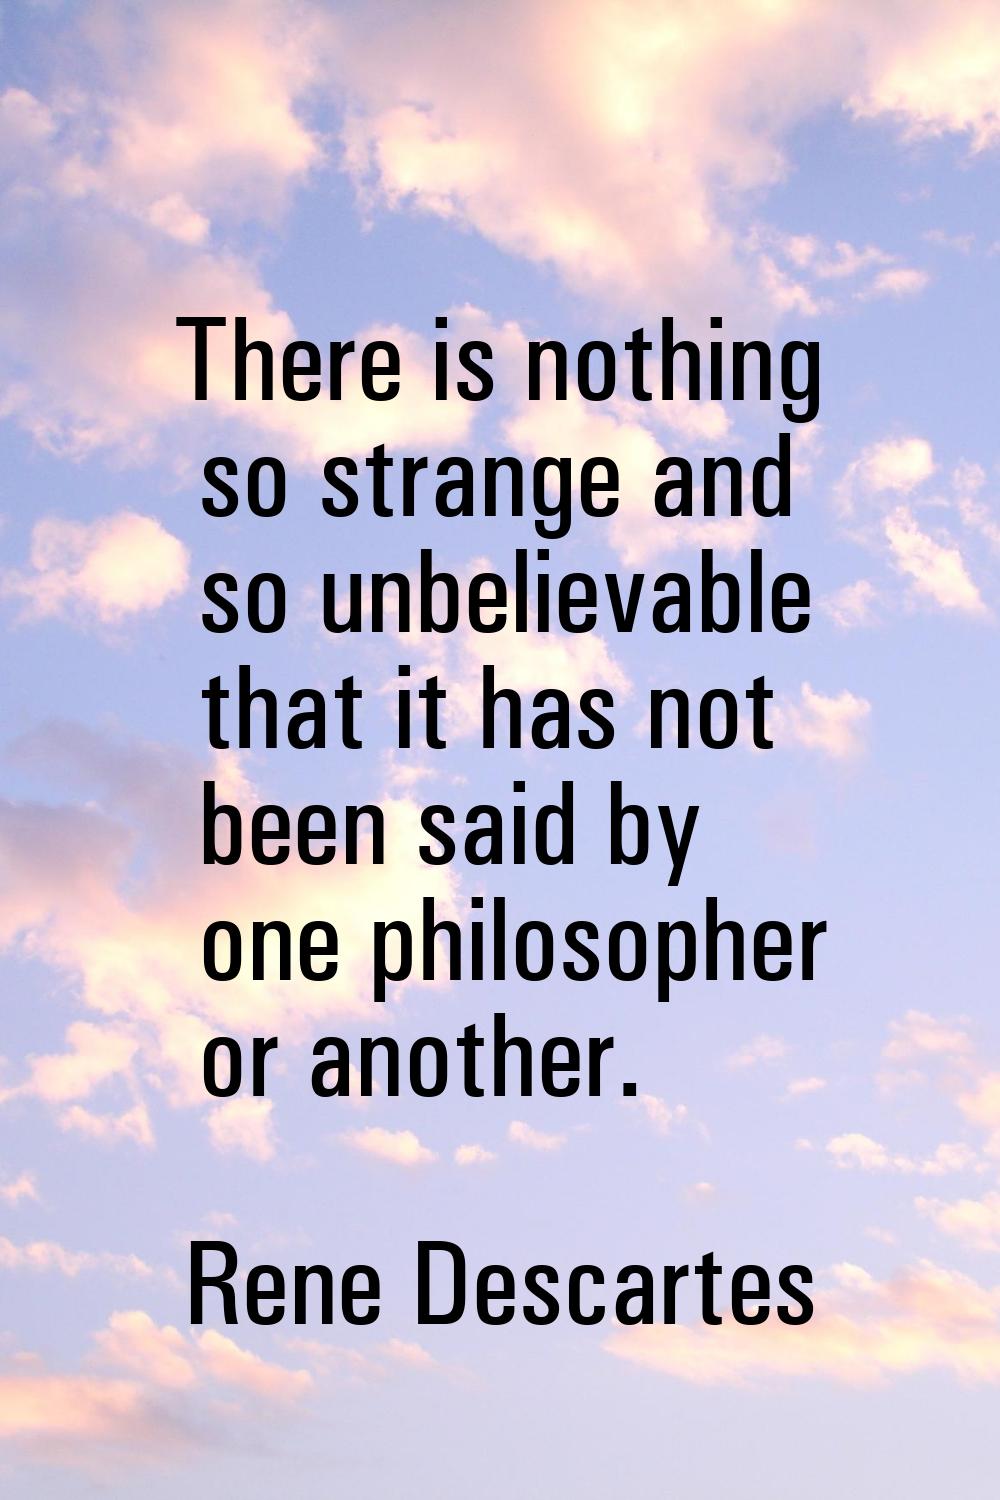 There is nothing so strange and so unbelievable that it has not been said by one philosopher or ano